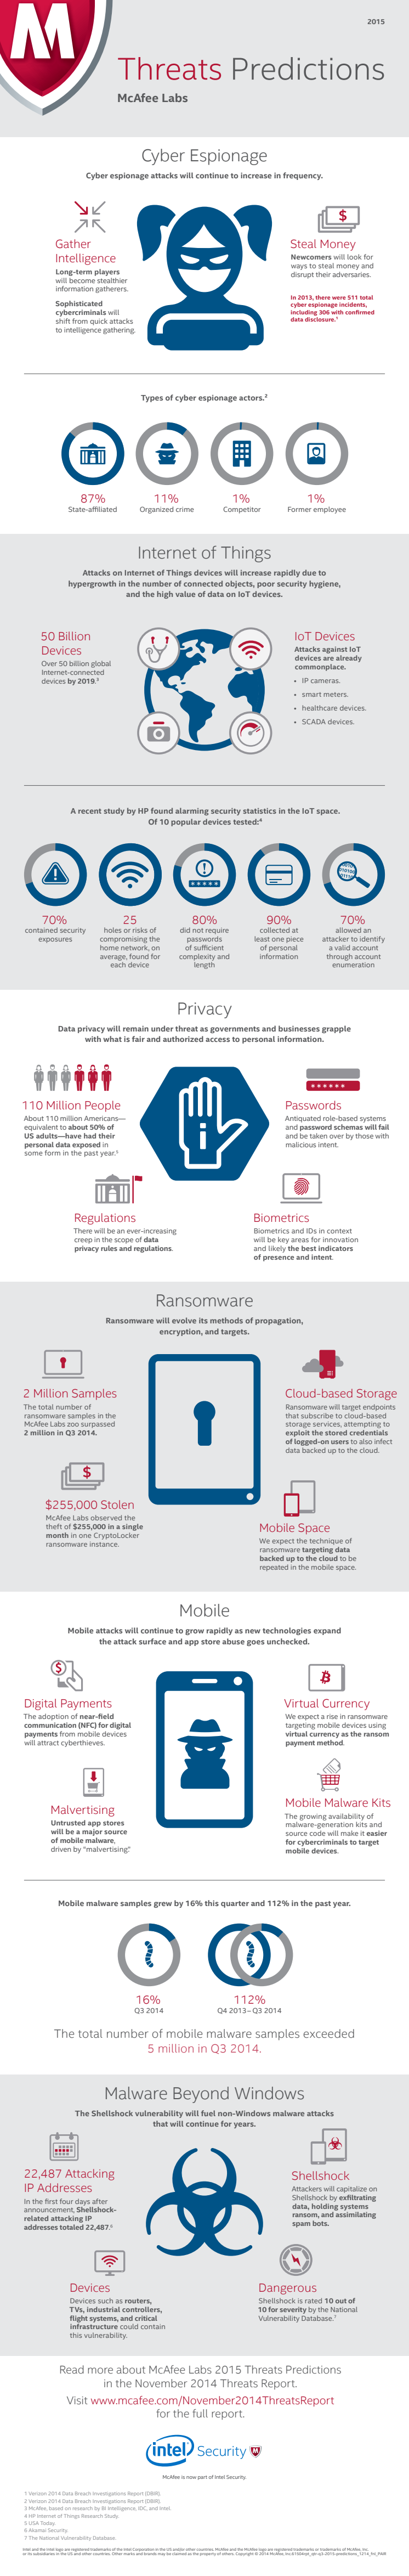 Infographic: McAfee Labs - 2015 Threats Predictions